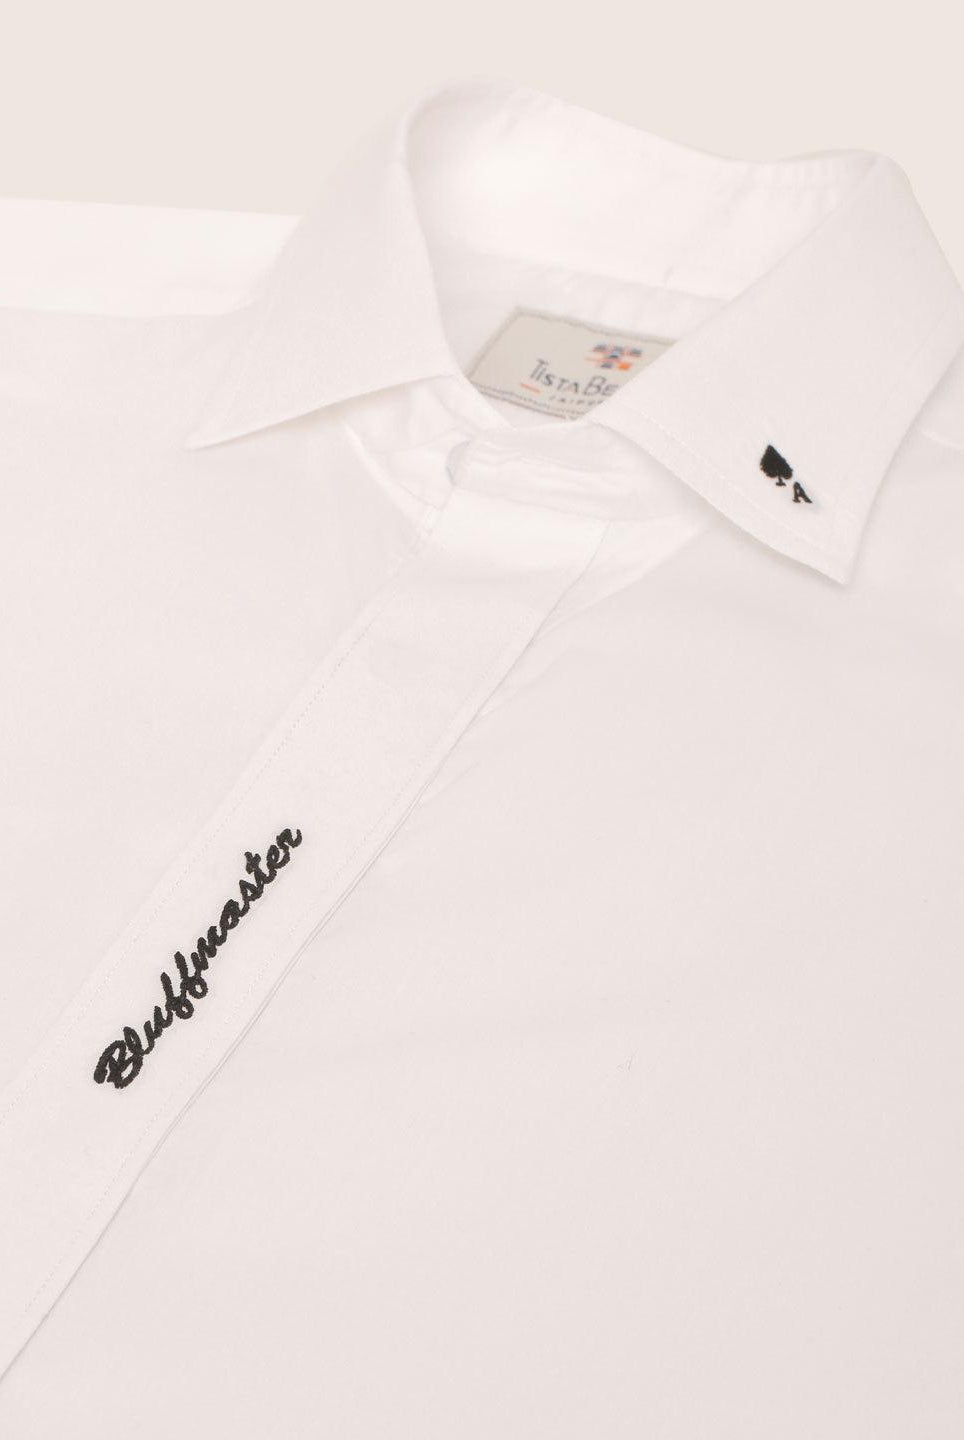 Bluffmaster With Ace Of Spade Embroided White Shirt - Tistabene